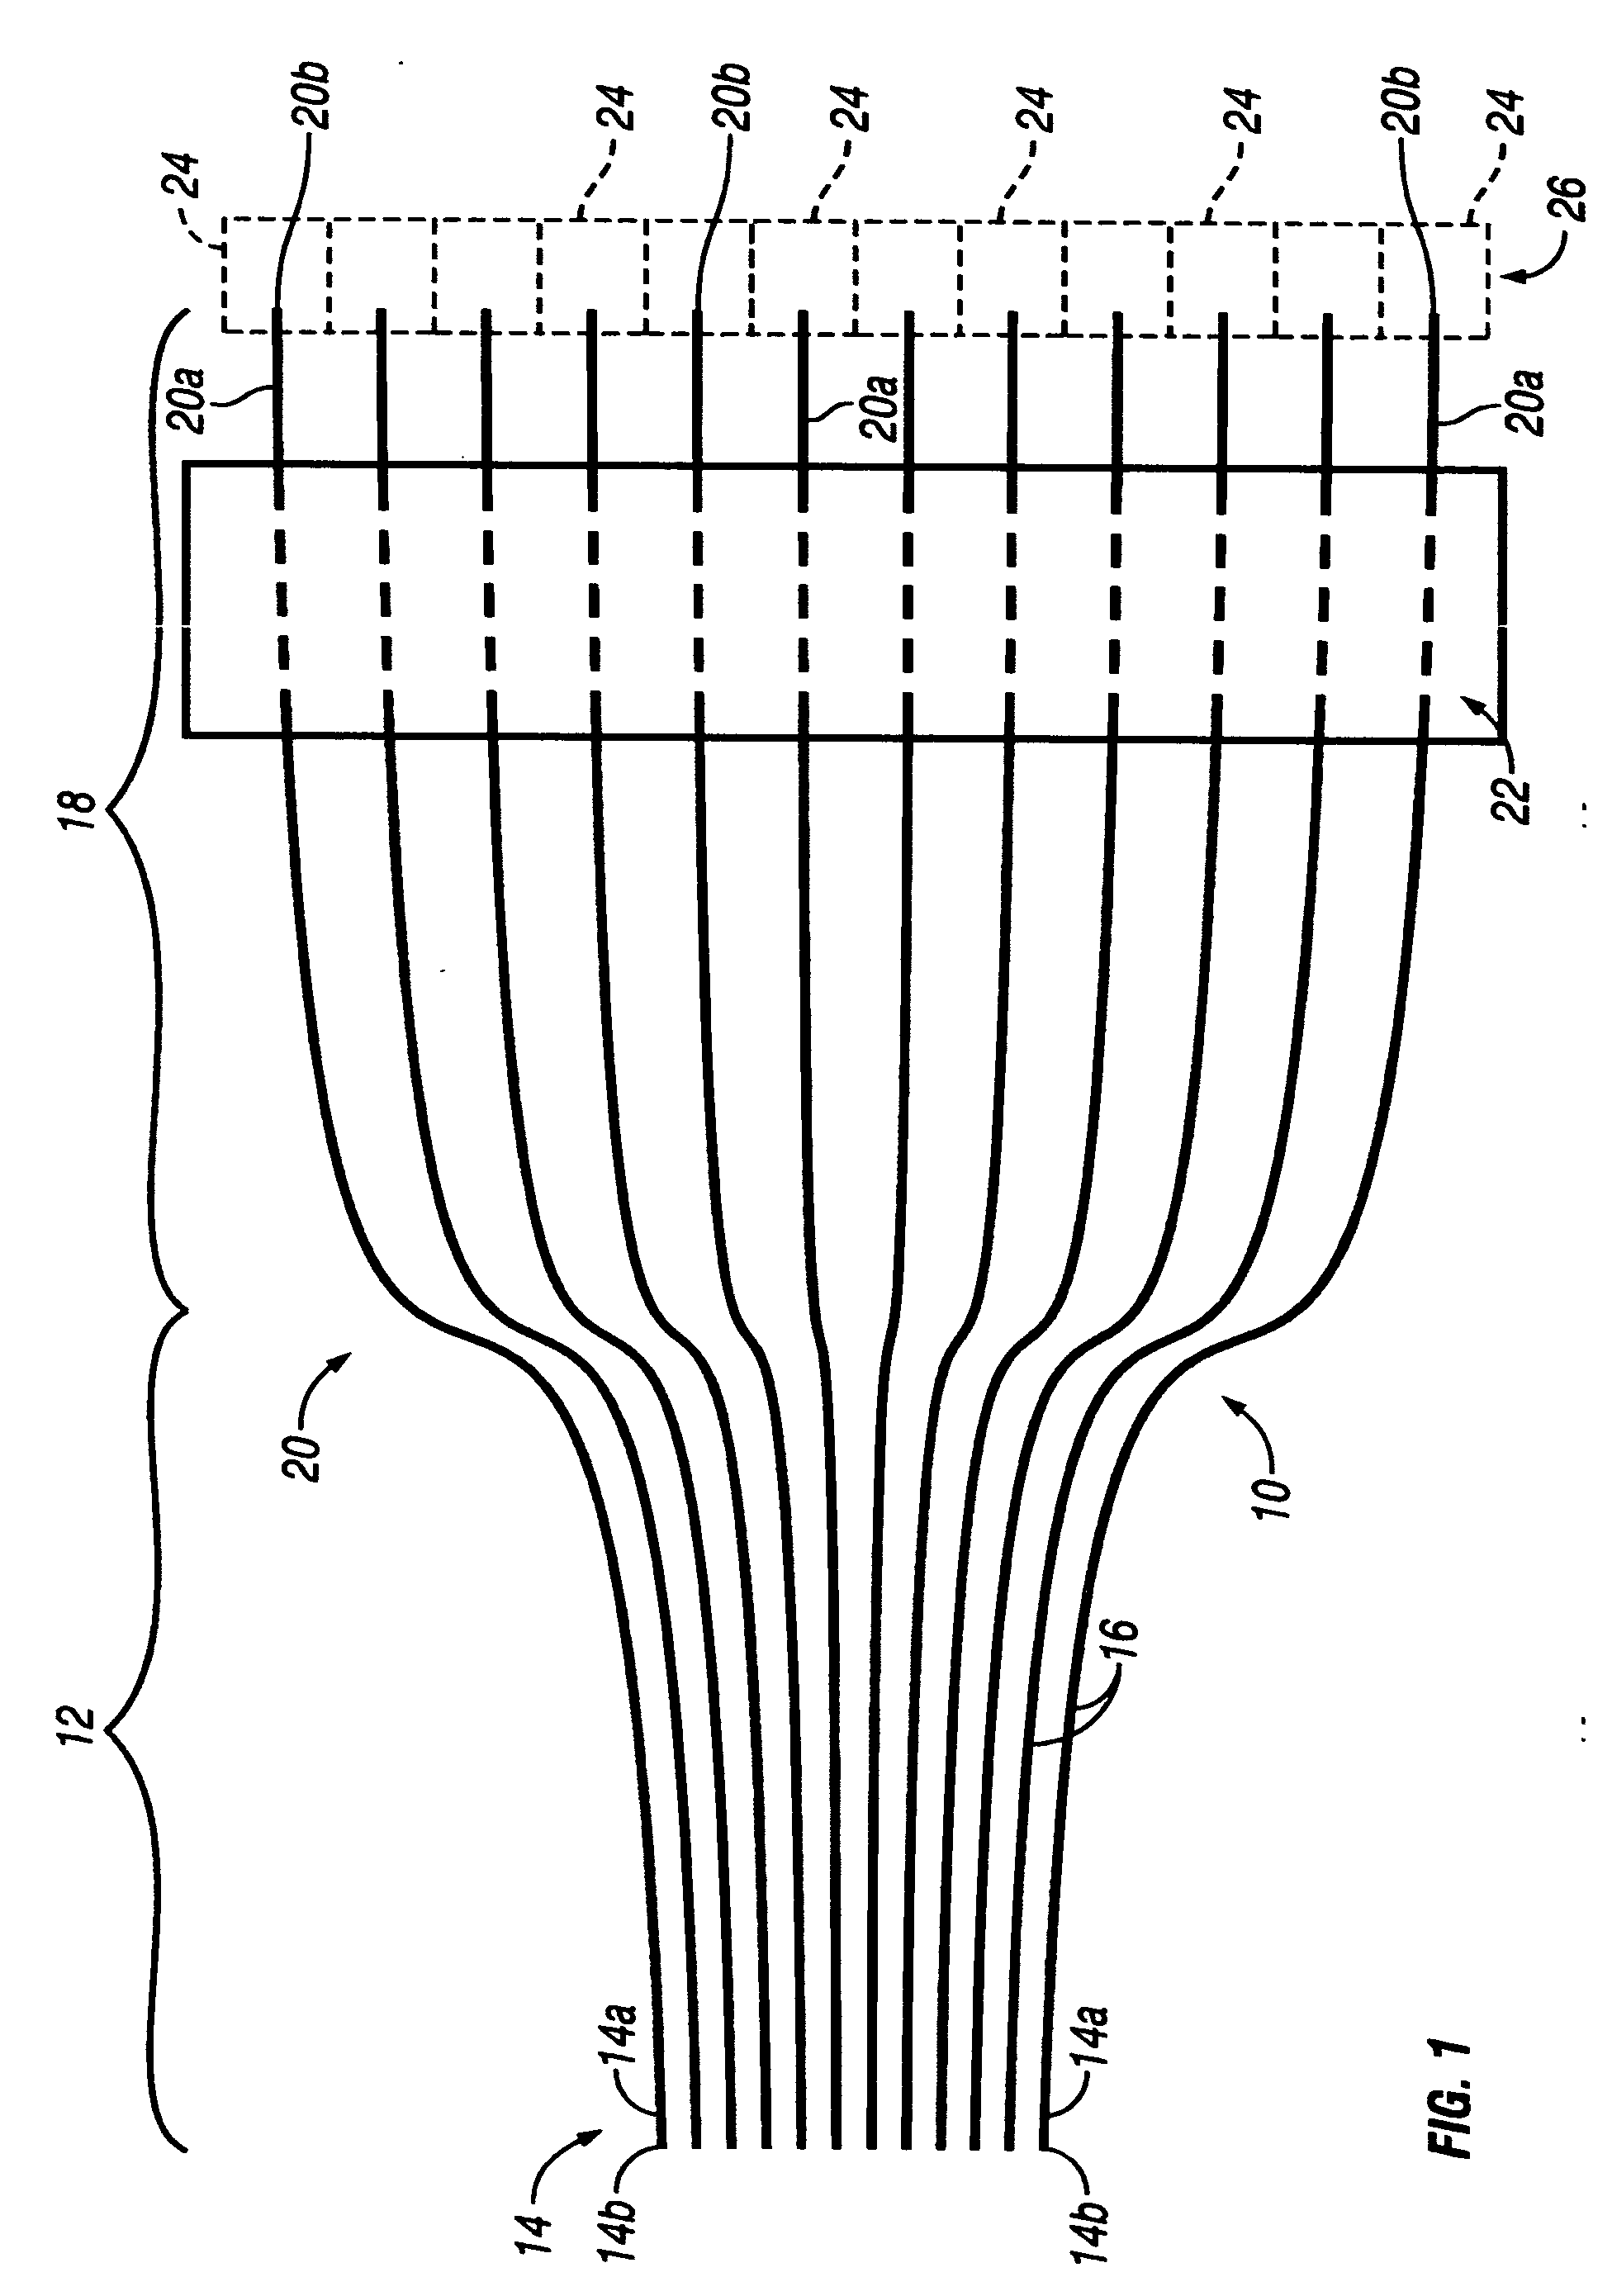 Parallel fiber-fan-out optical interconnect for fiber optic system